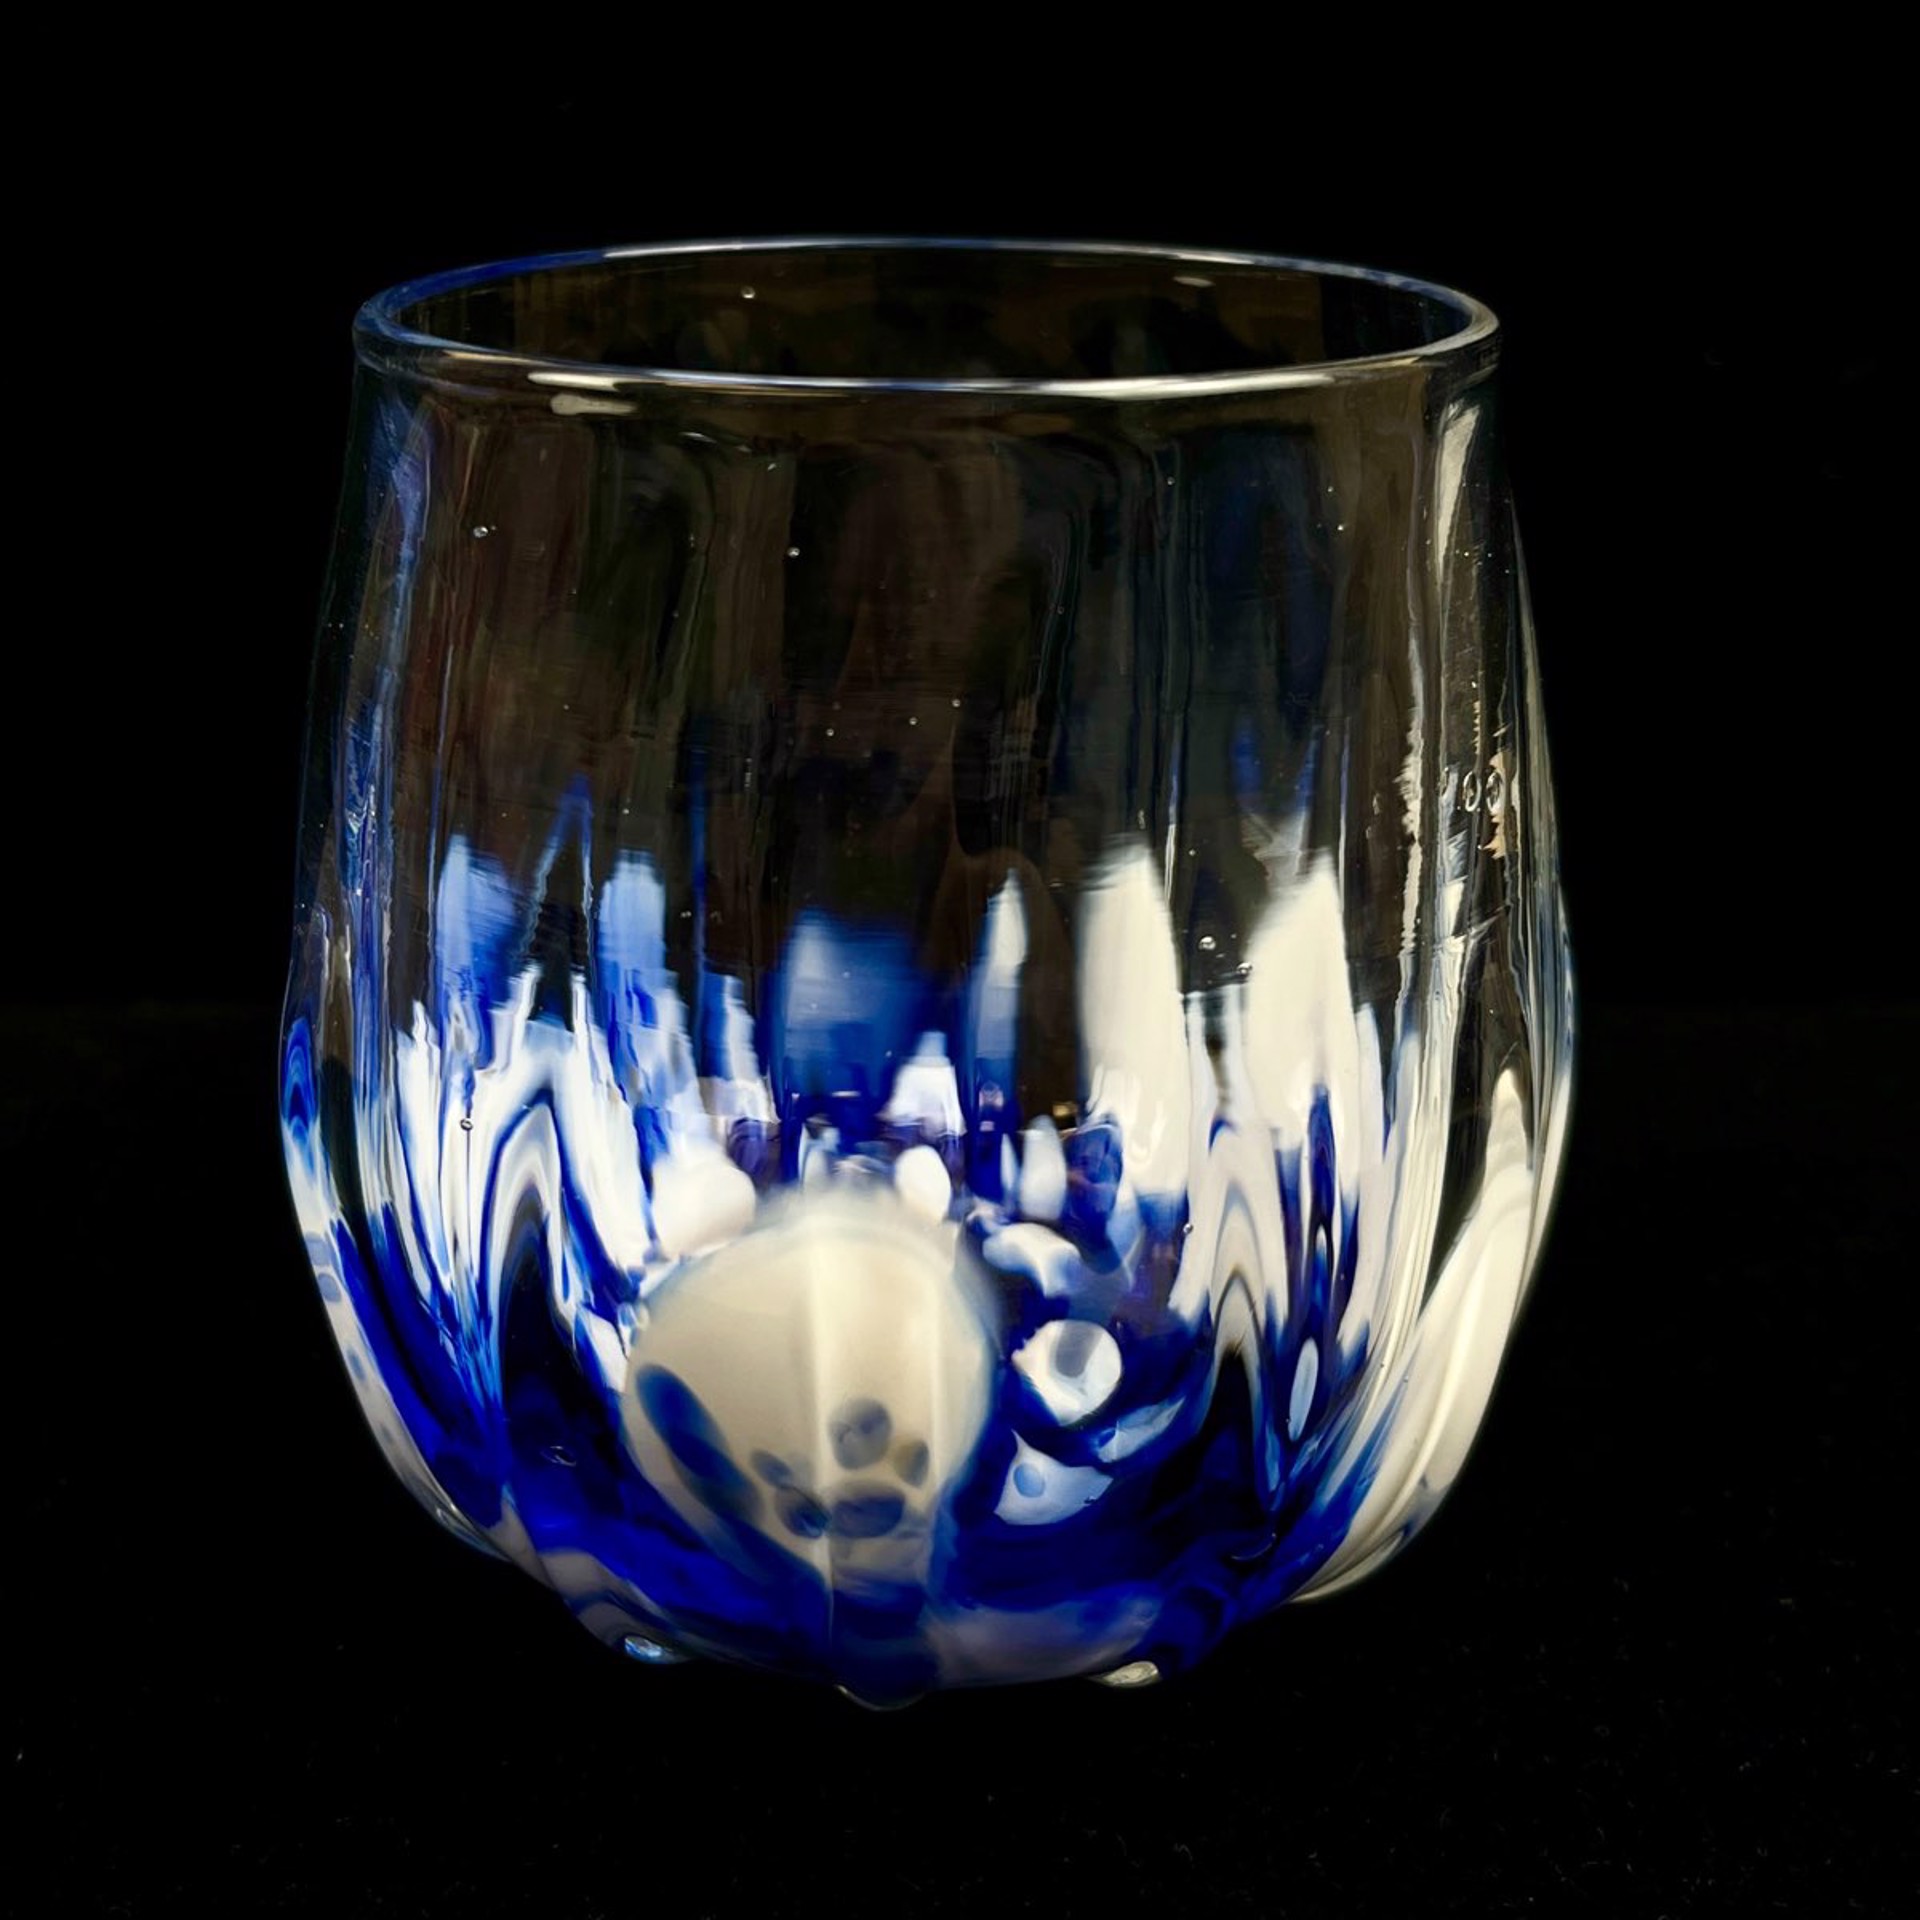 Blue Rocks Glass by Chad Balster